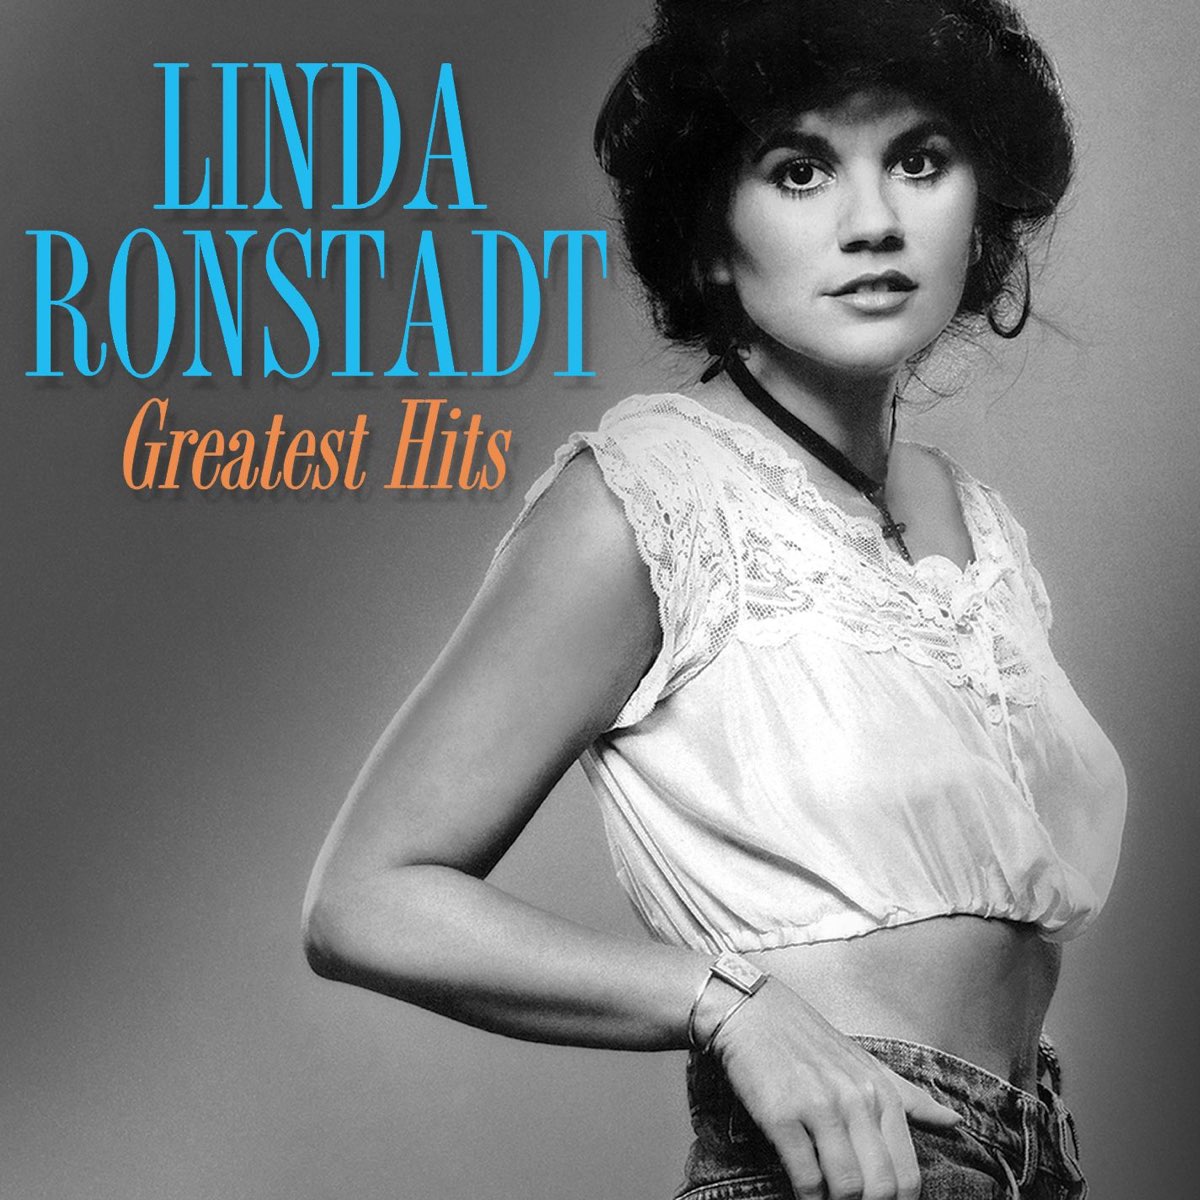 ‎Greatest Hits (Remastered) by Linda Ronstadt on Apple Music